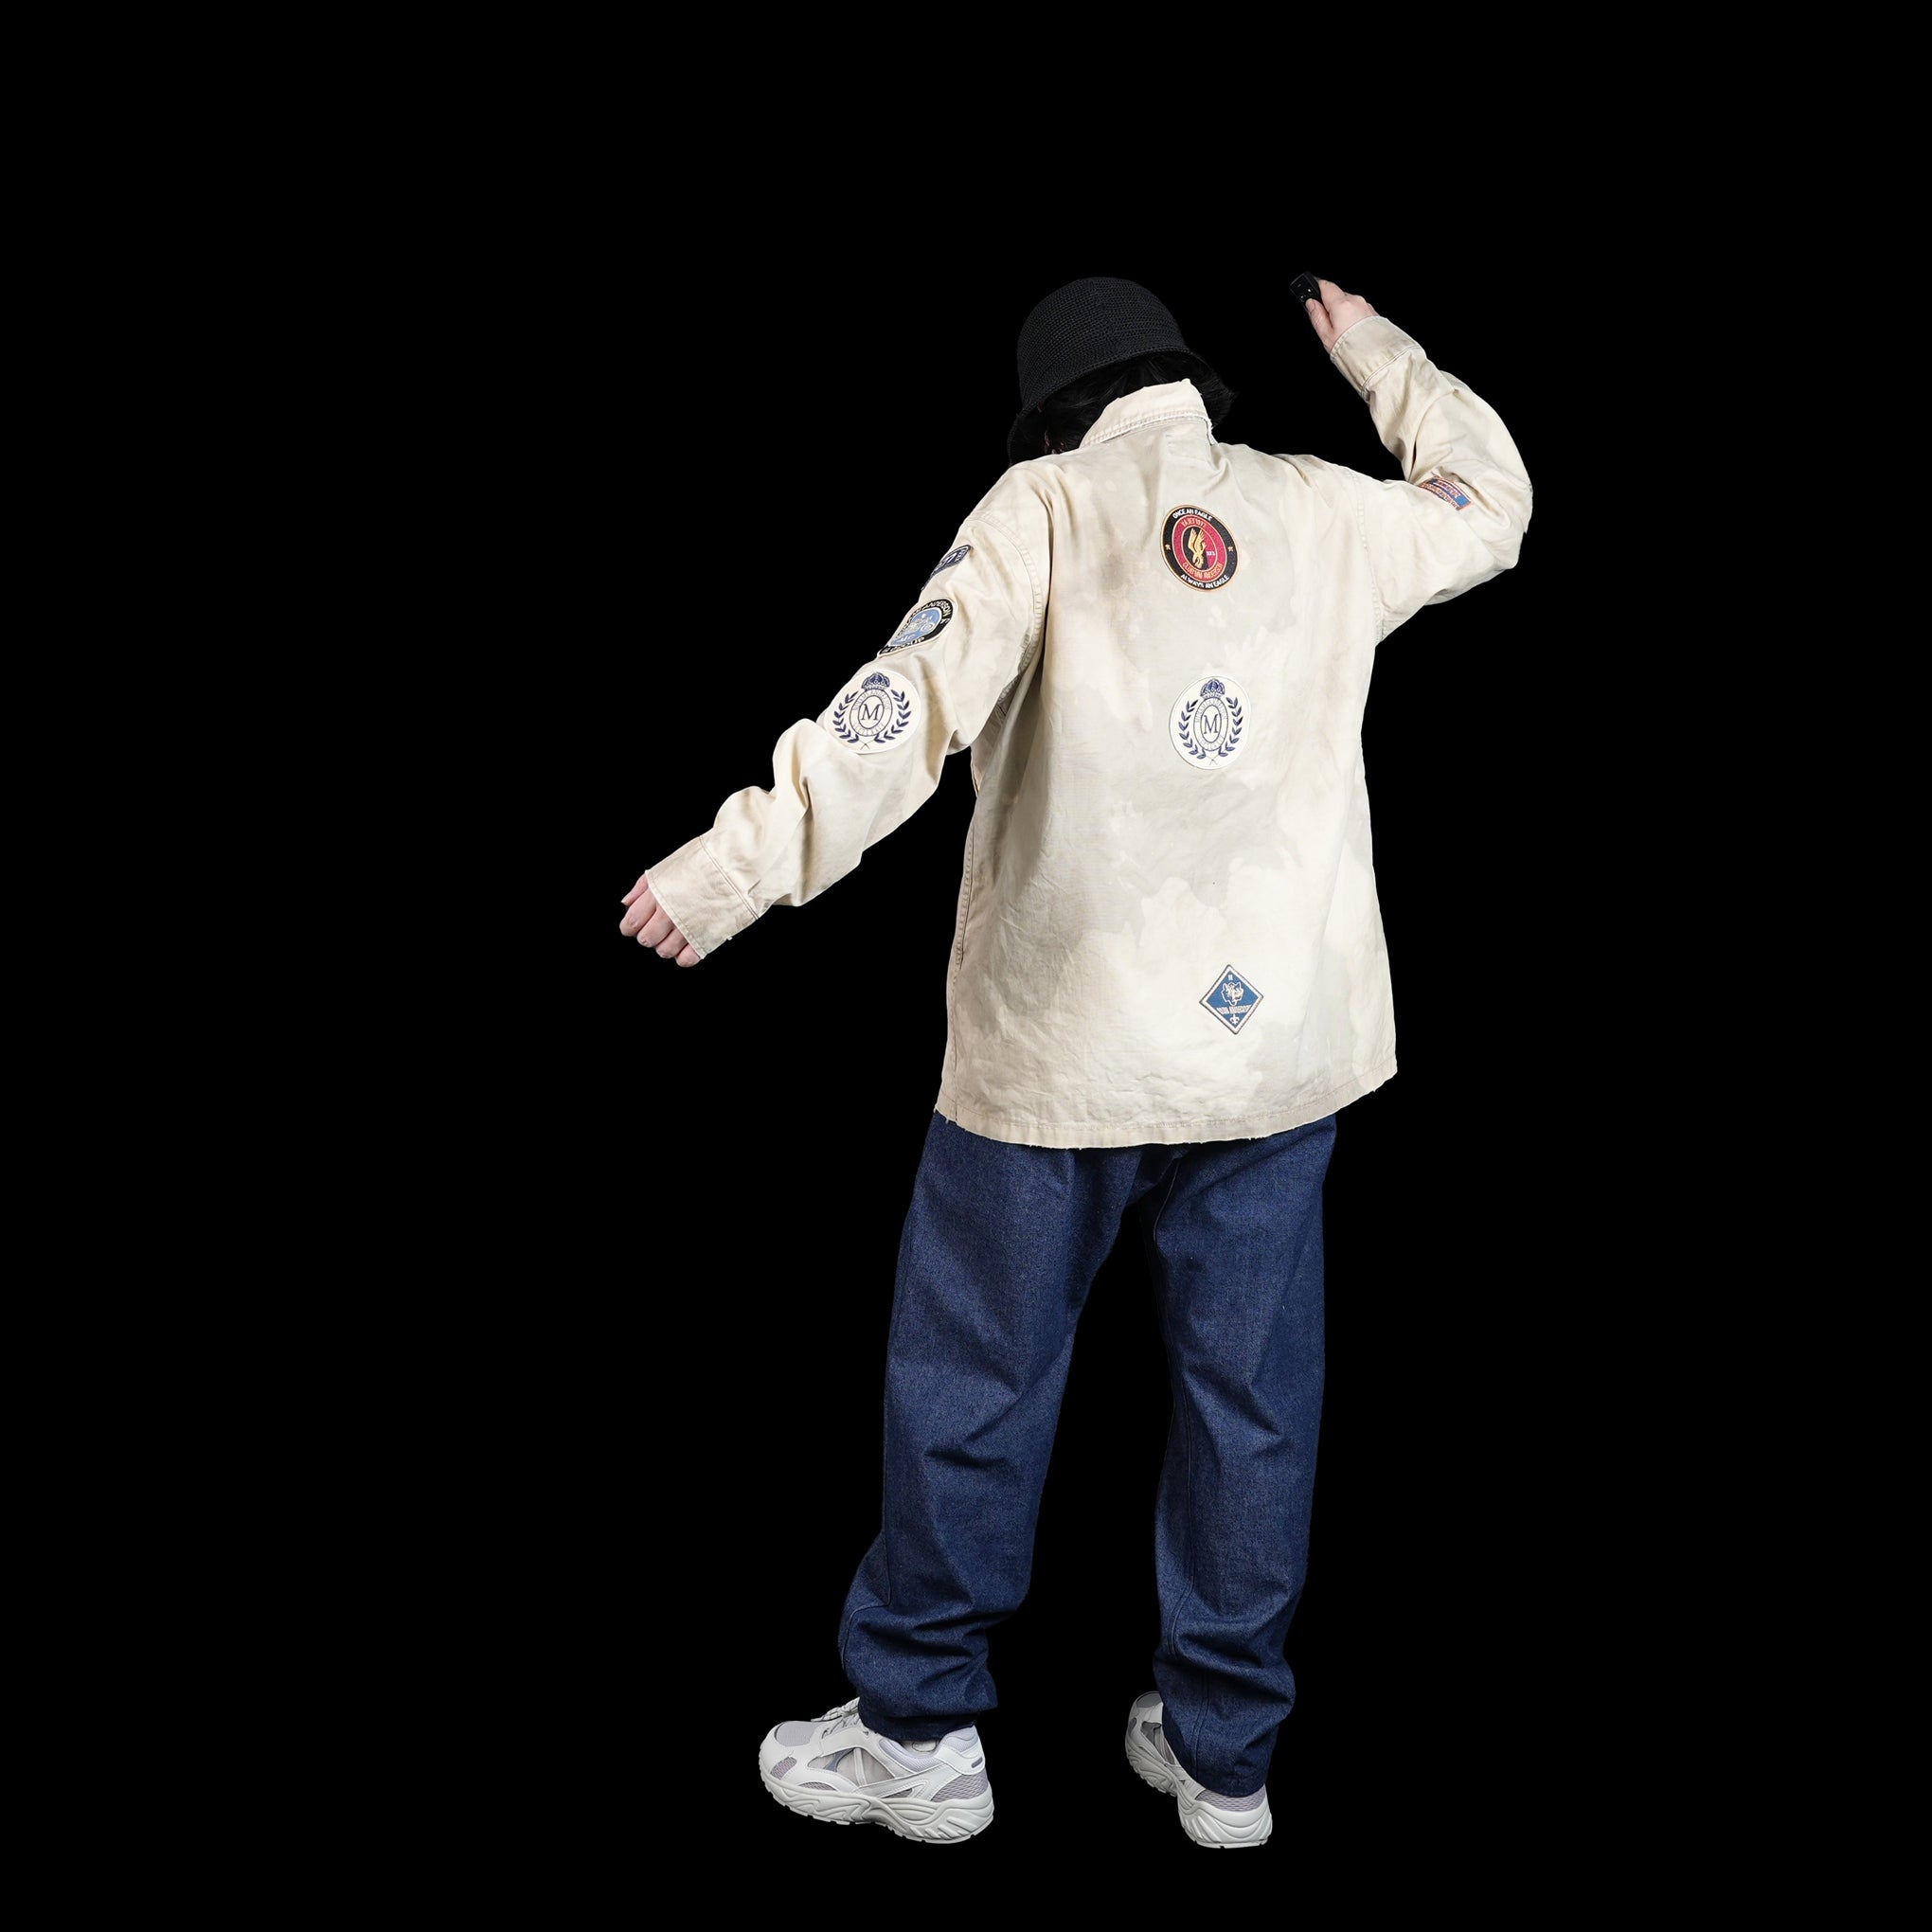 No:23＃01373-6110 | Name:BOYSCOUT SHIRTS-PATCHES | Color:ベージュ【MINAMI ANDERSON_ミナミアンダーソン】